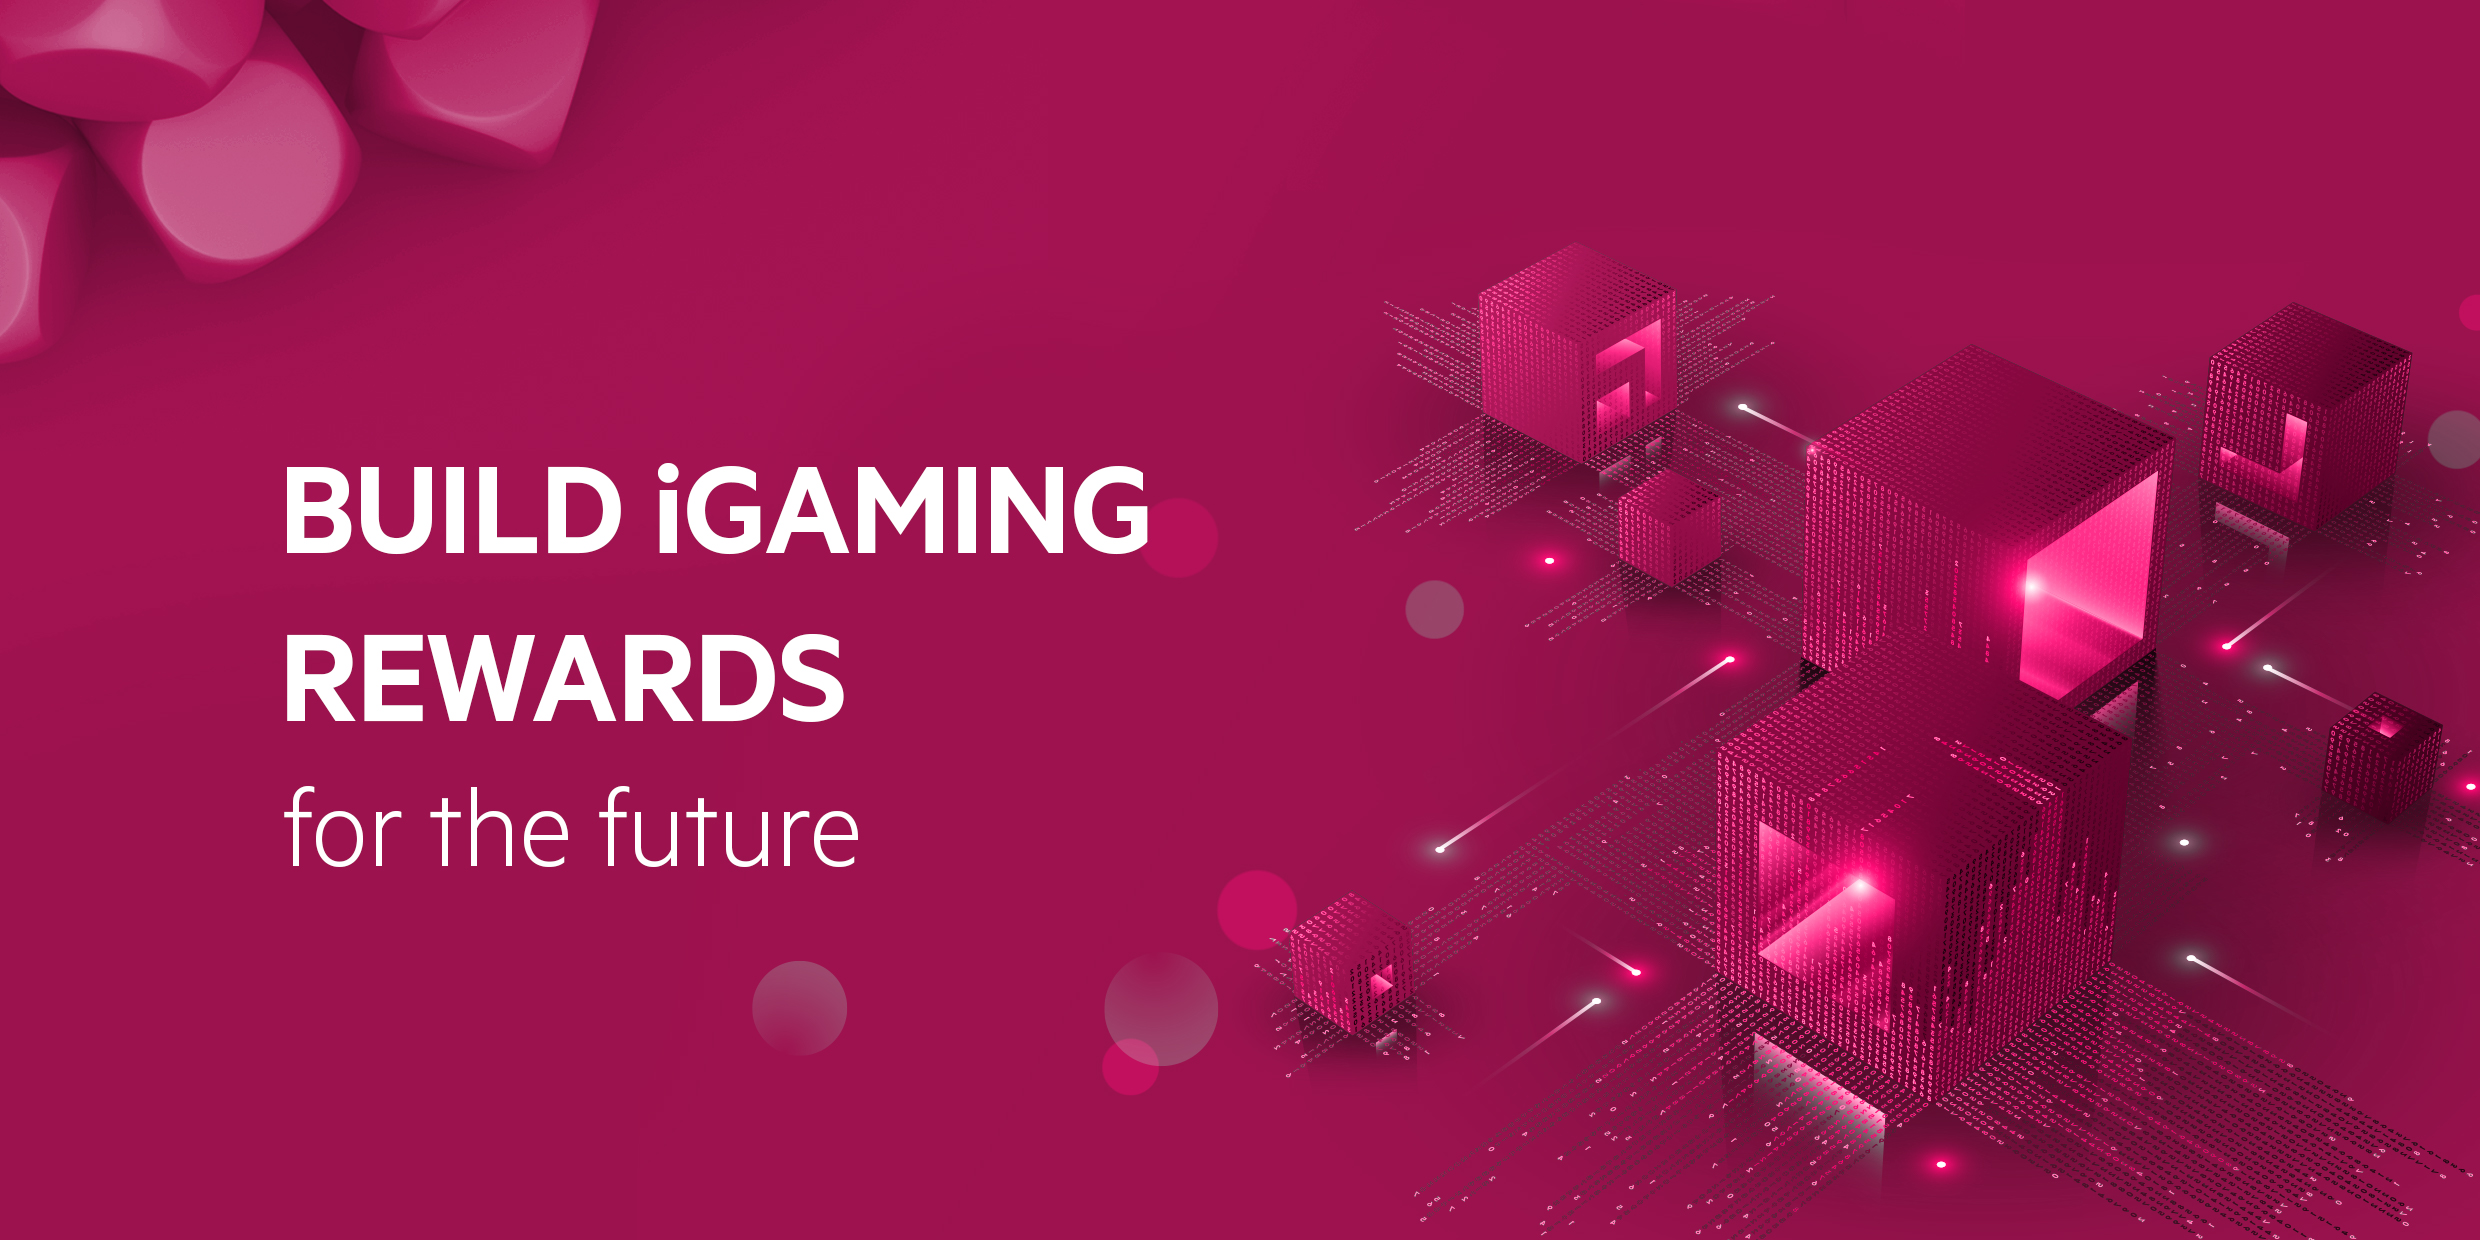 Image with text - Build iGaming rewards for the future